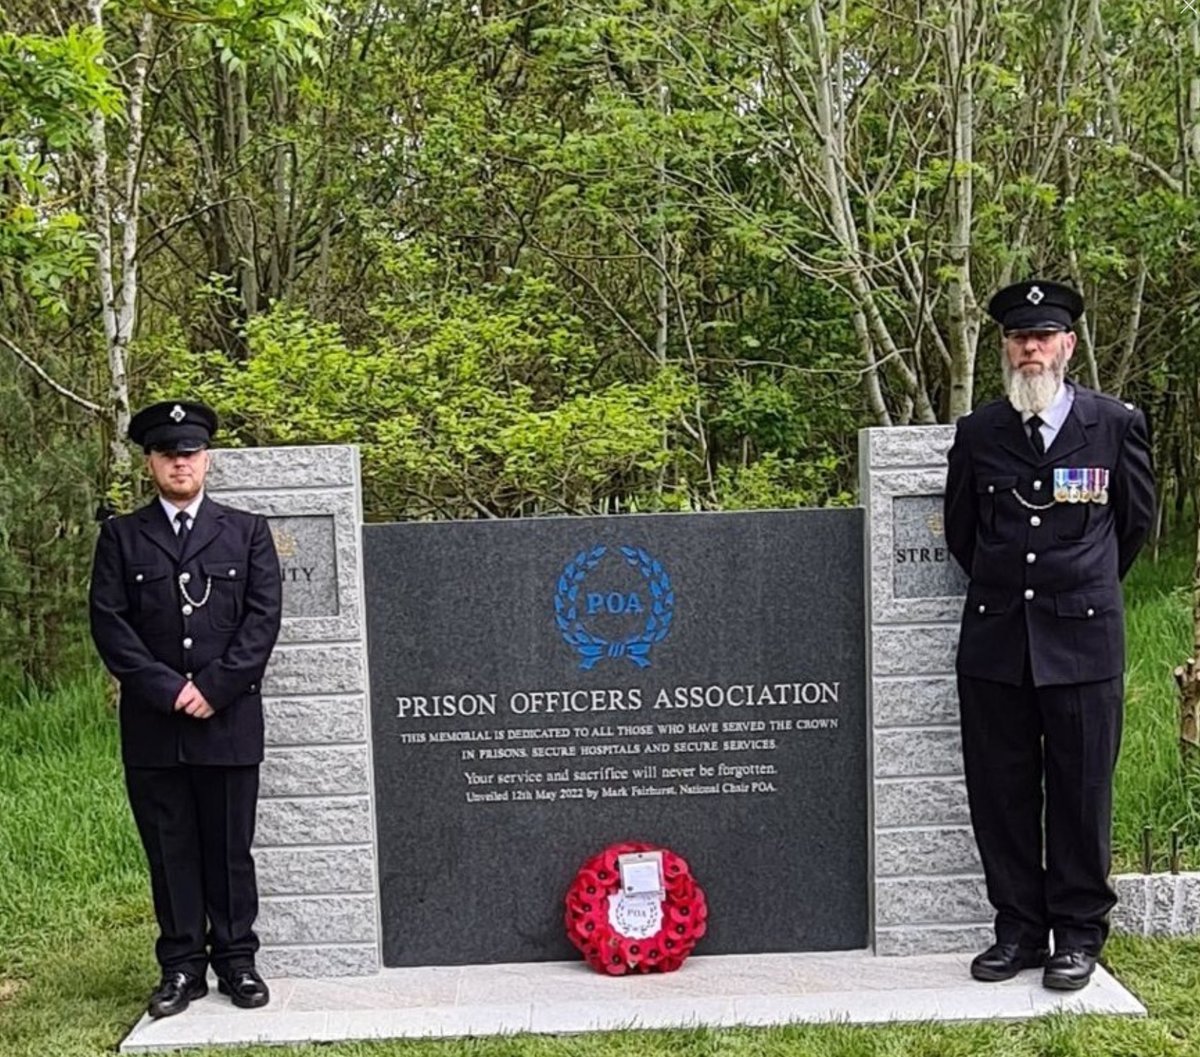 During a visit to the National Memorial Arboretum, two of our officers took the time to be part of the dedication and unveiling of the POA memorial for all prison staff who have been lost and served within the armed forces. Well done both